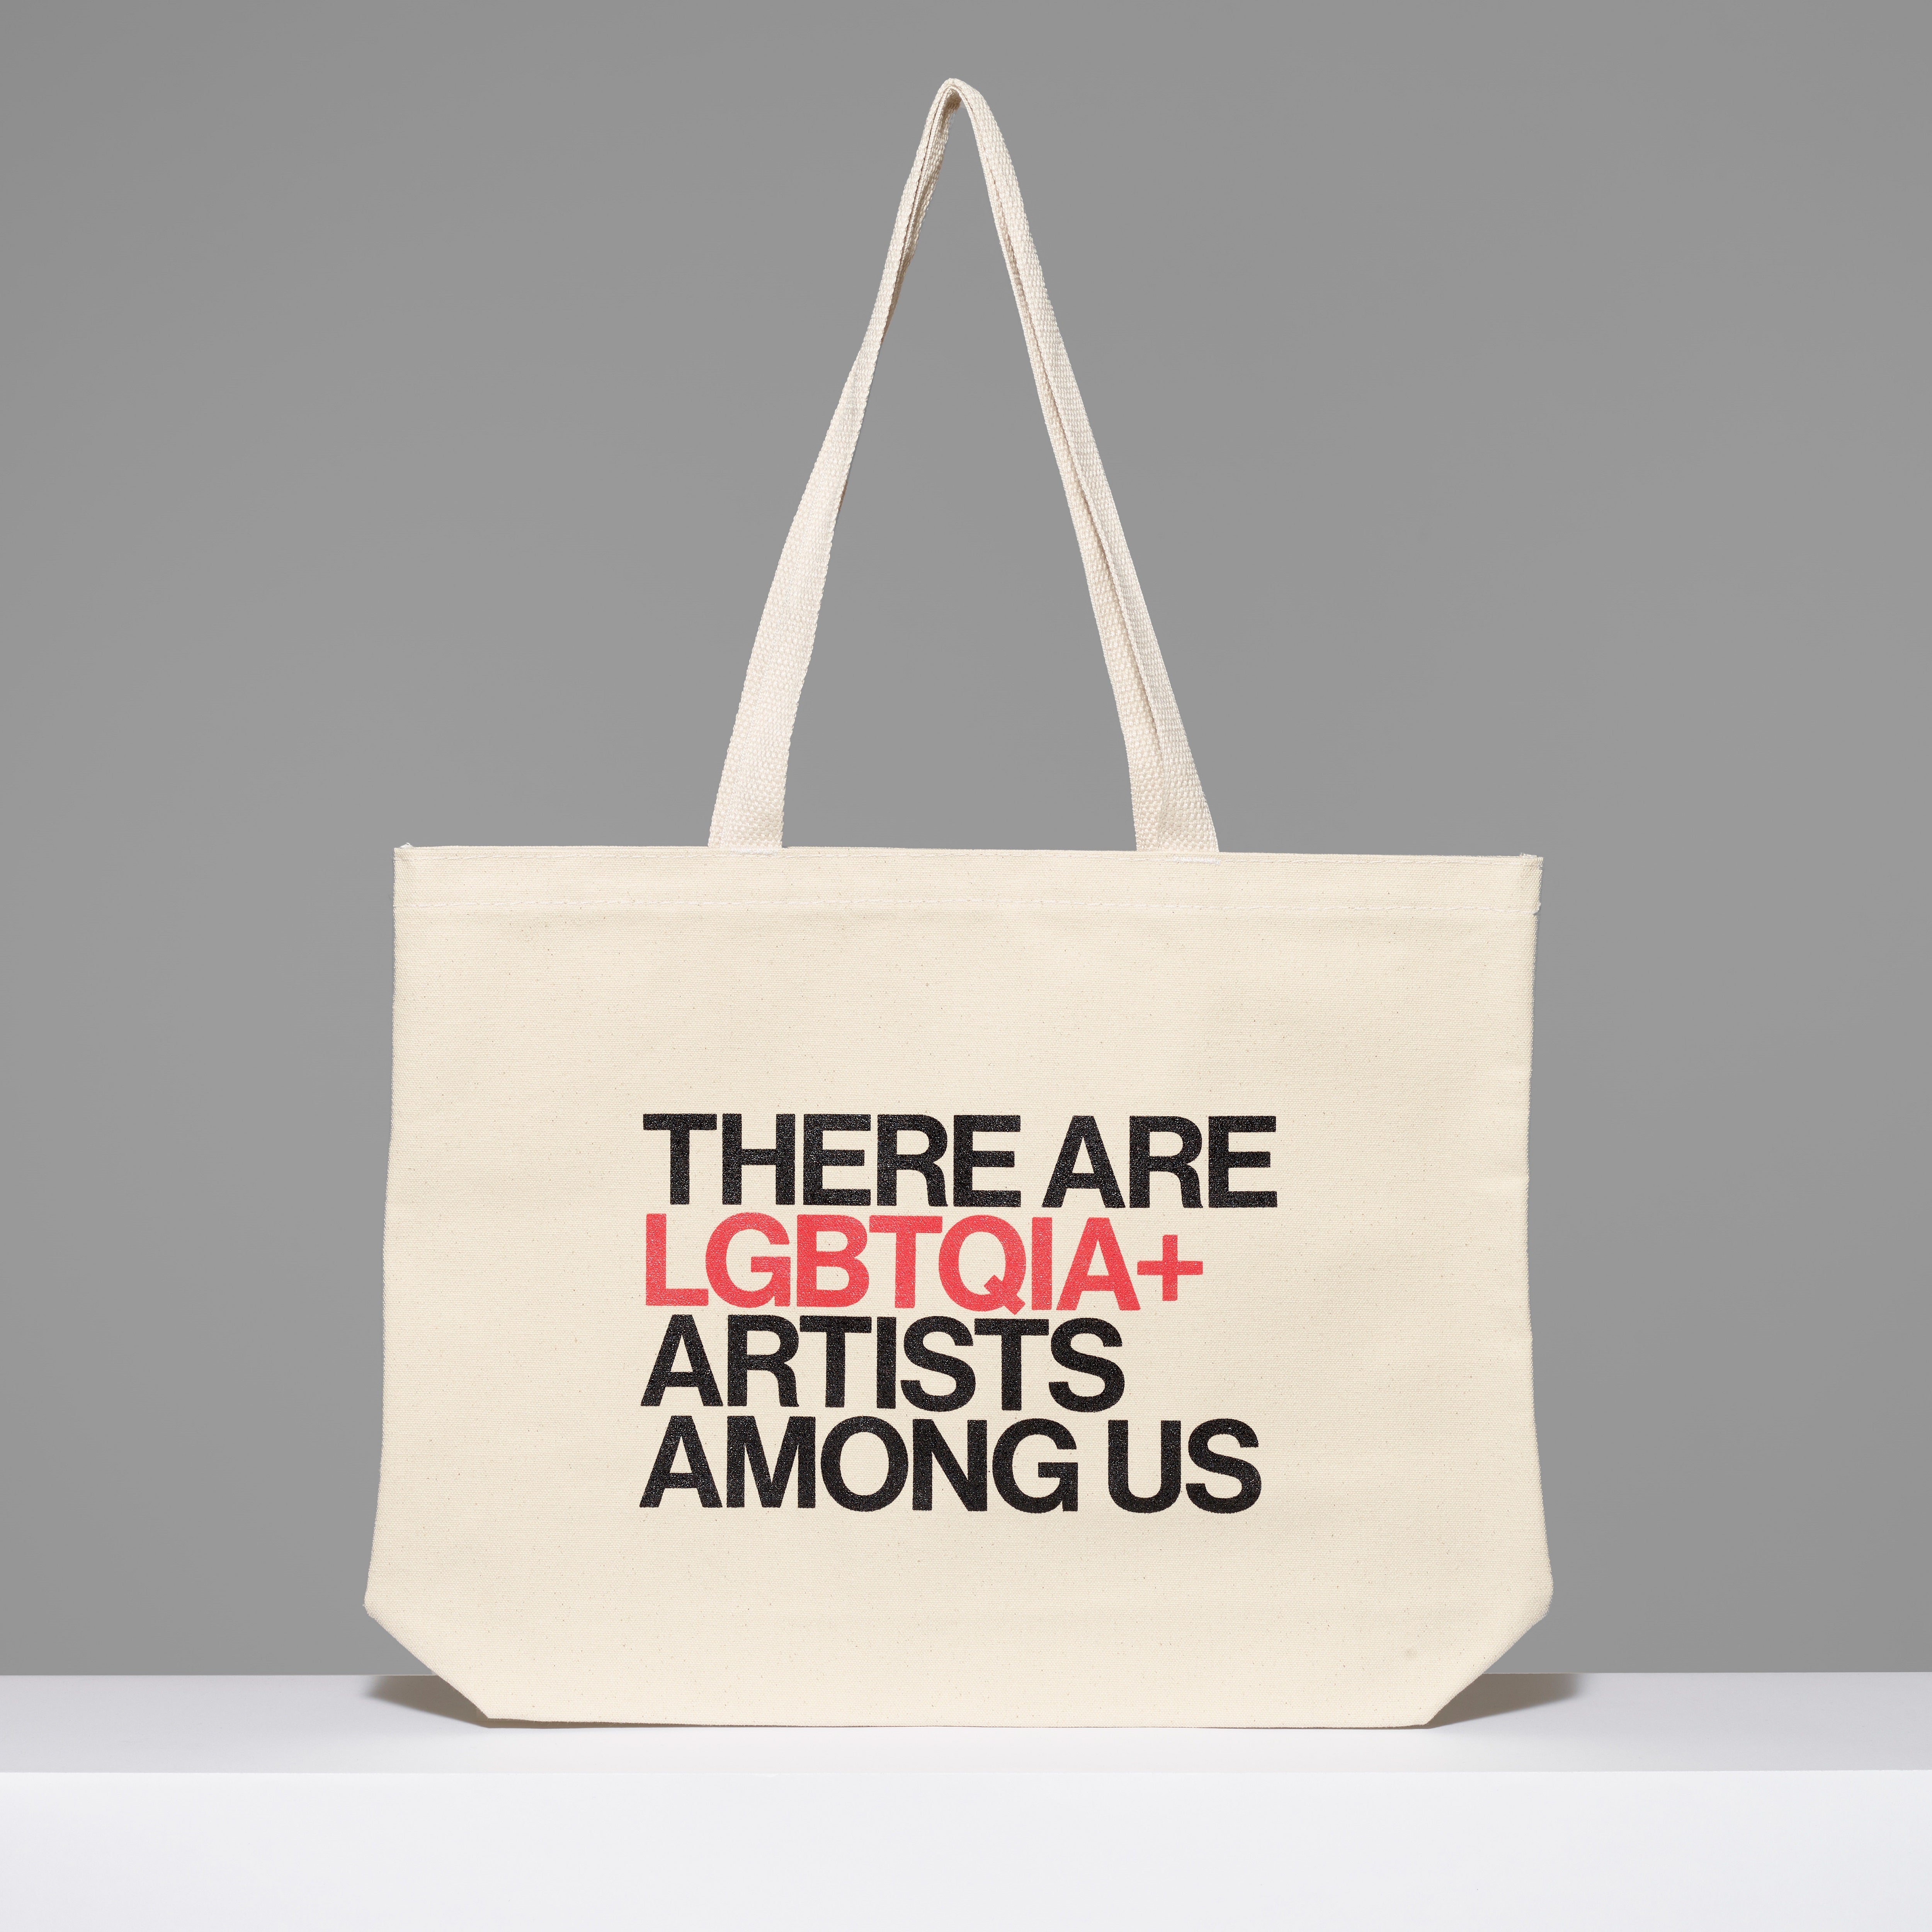 100% cotton There Are LGBTQIA+ Artists Among Us Tote with black and red text. Measures 18" x 14". 3.5" gusset, 11" handles.